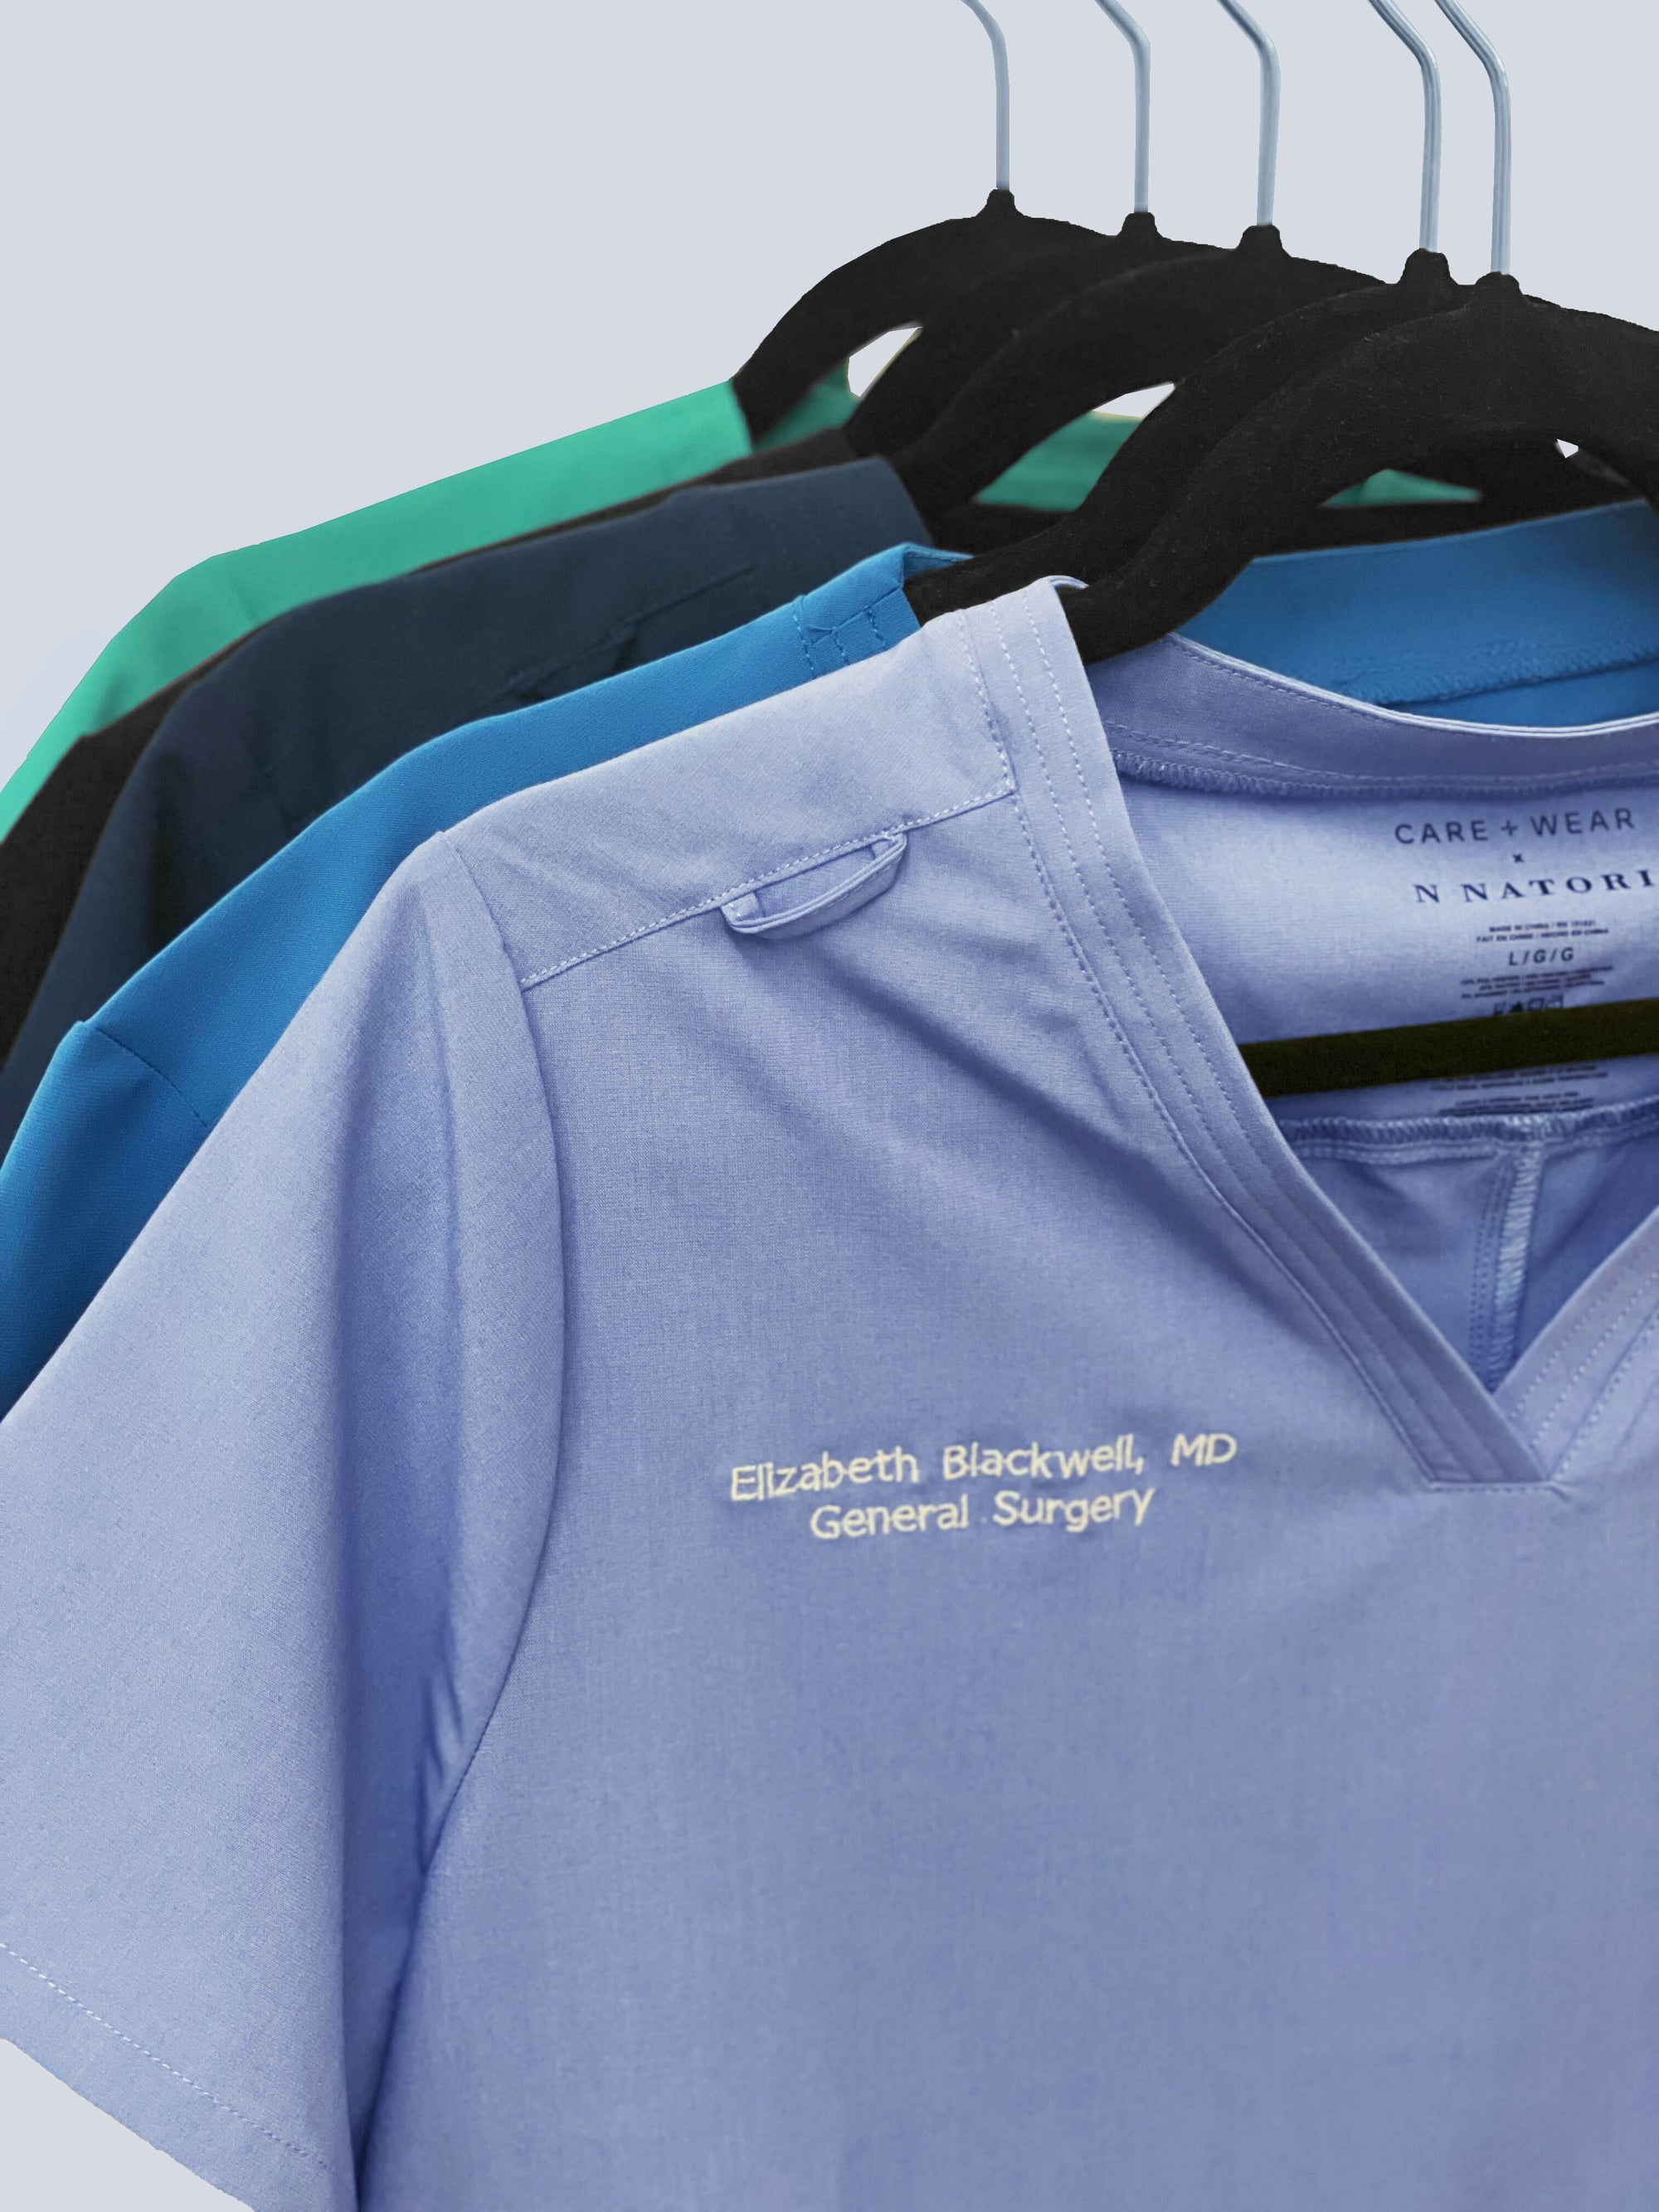 embroidered scrubs